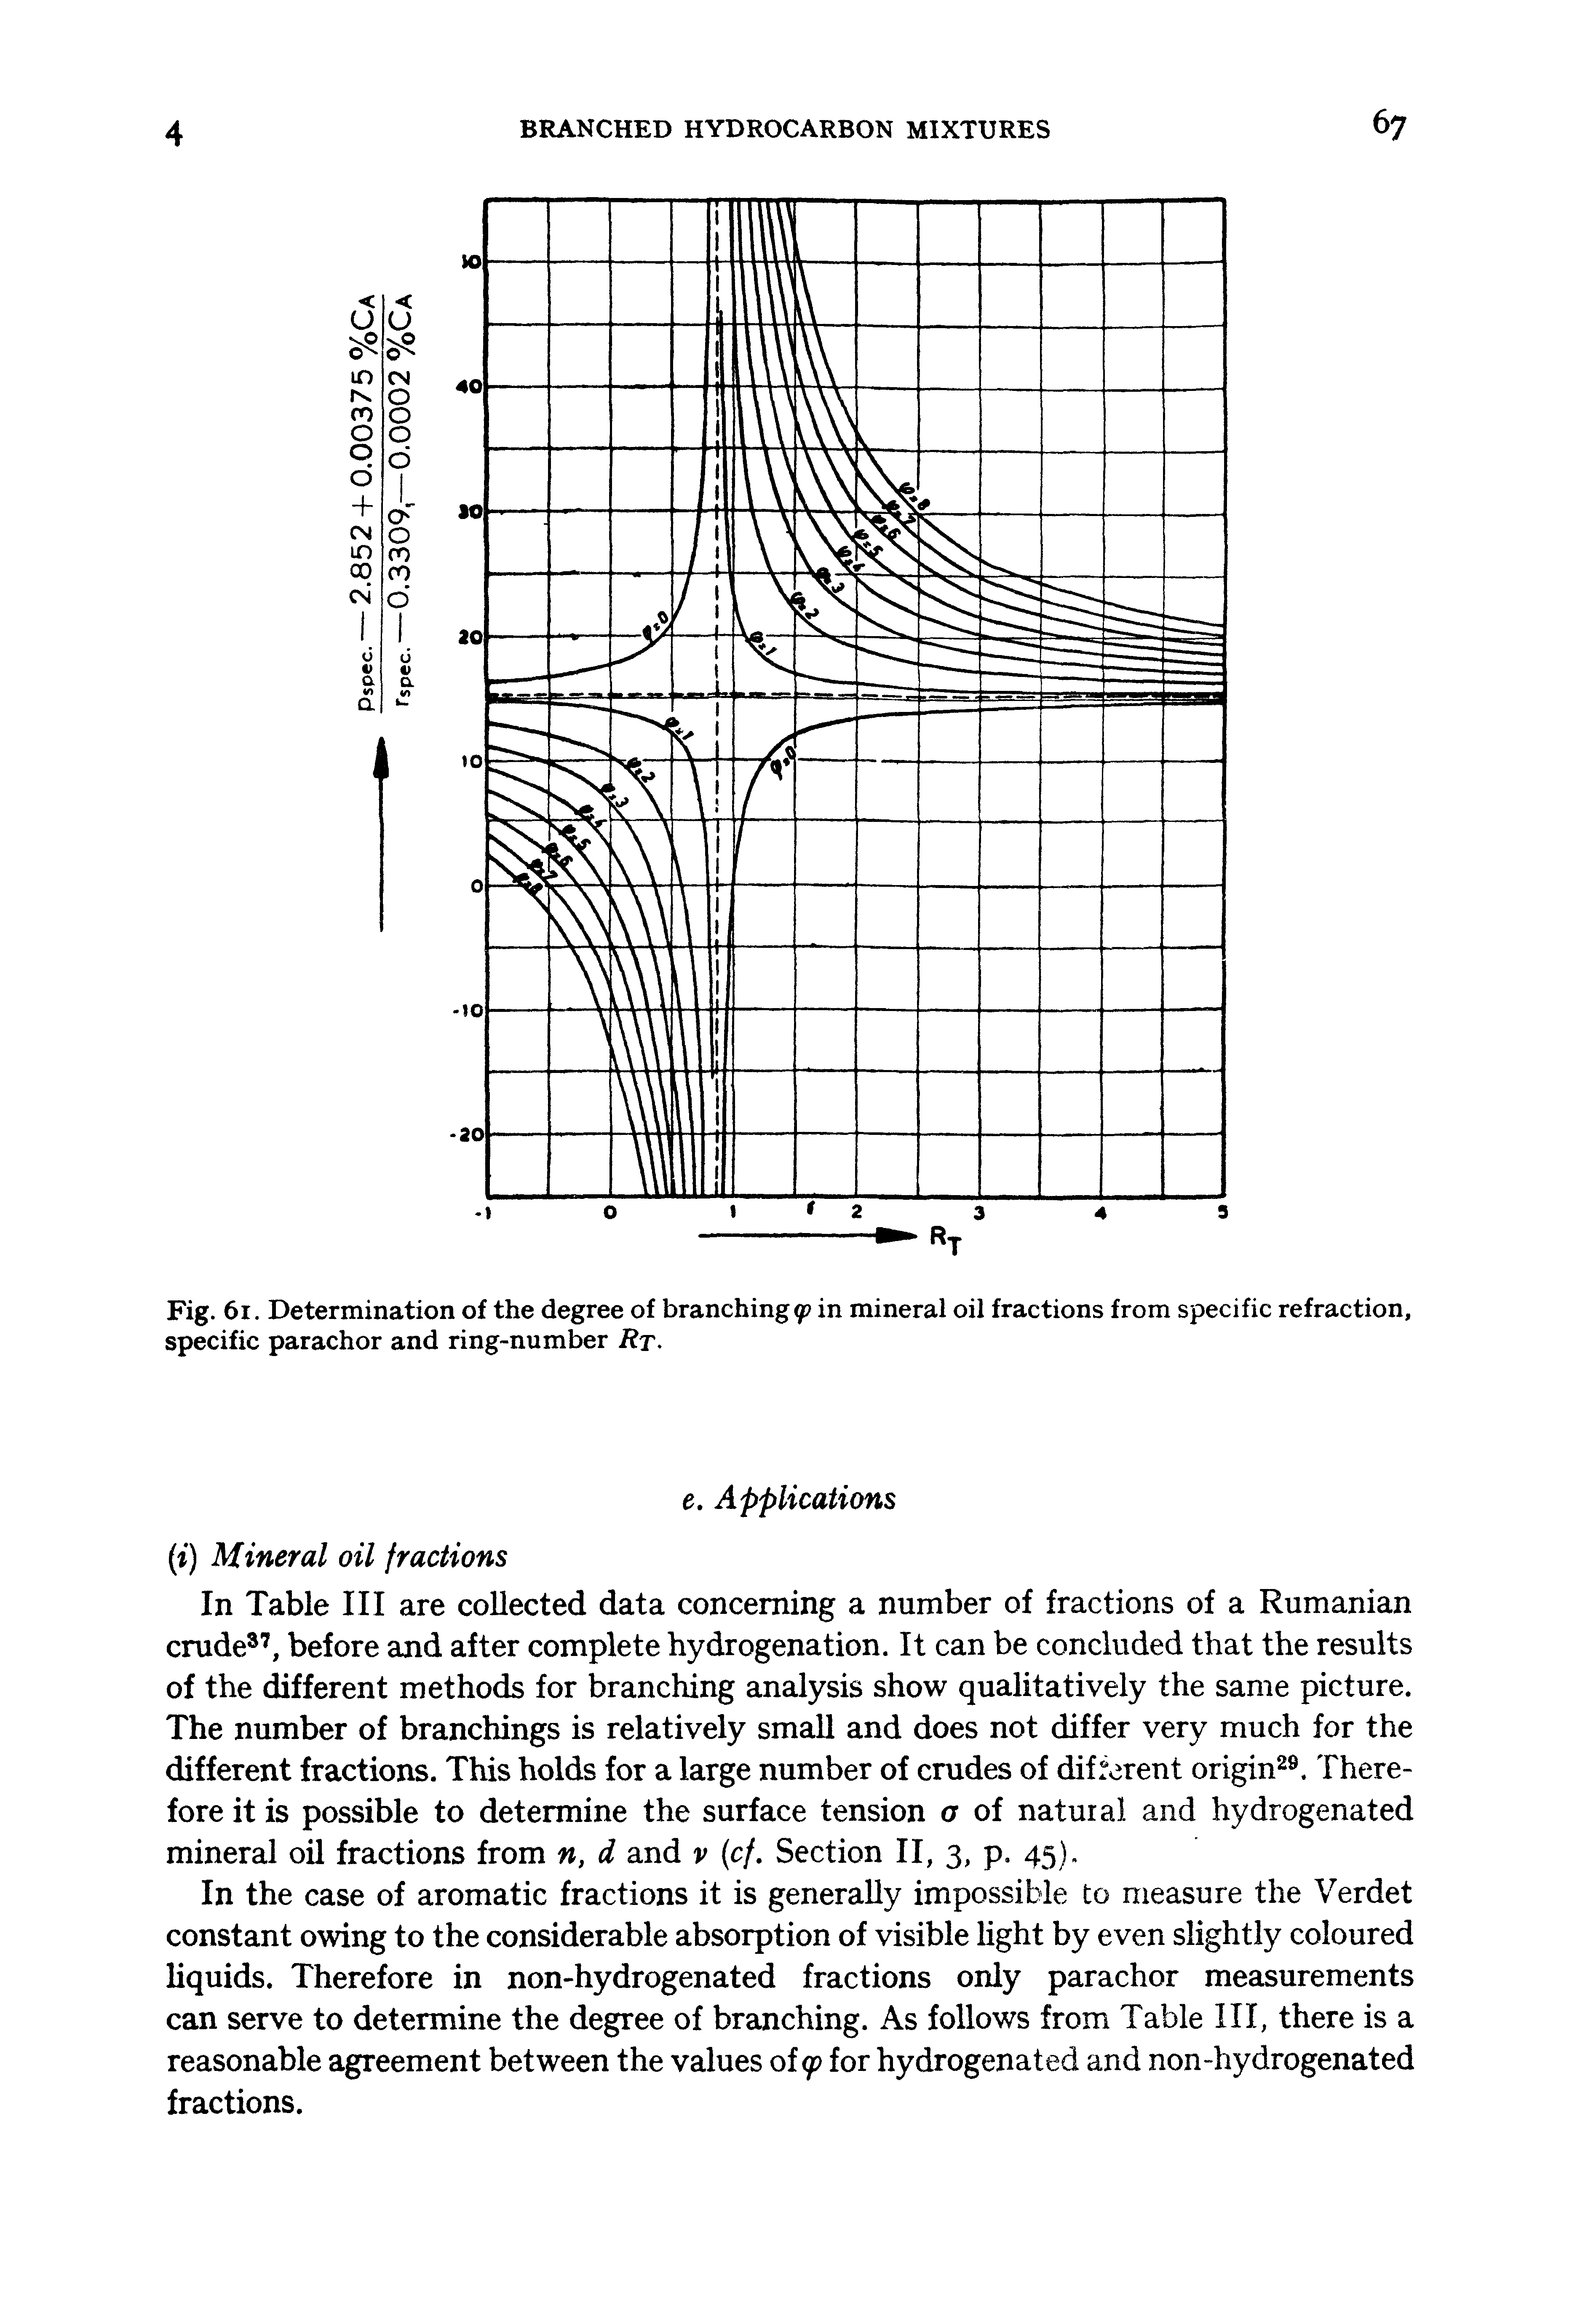 Fig. 61. Determination of the degree of branching in mineral oil fractions from specific refraction, specific parachor and ring-number Rt.